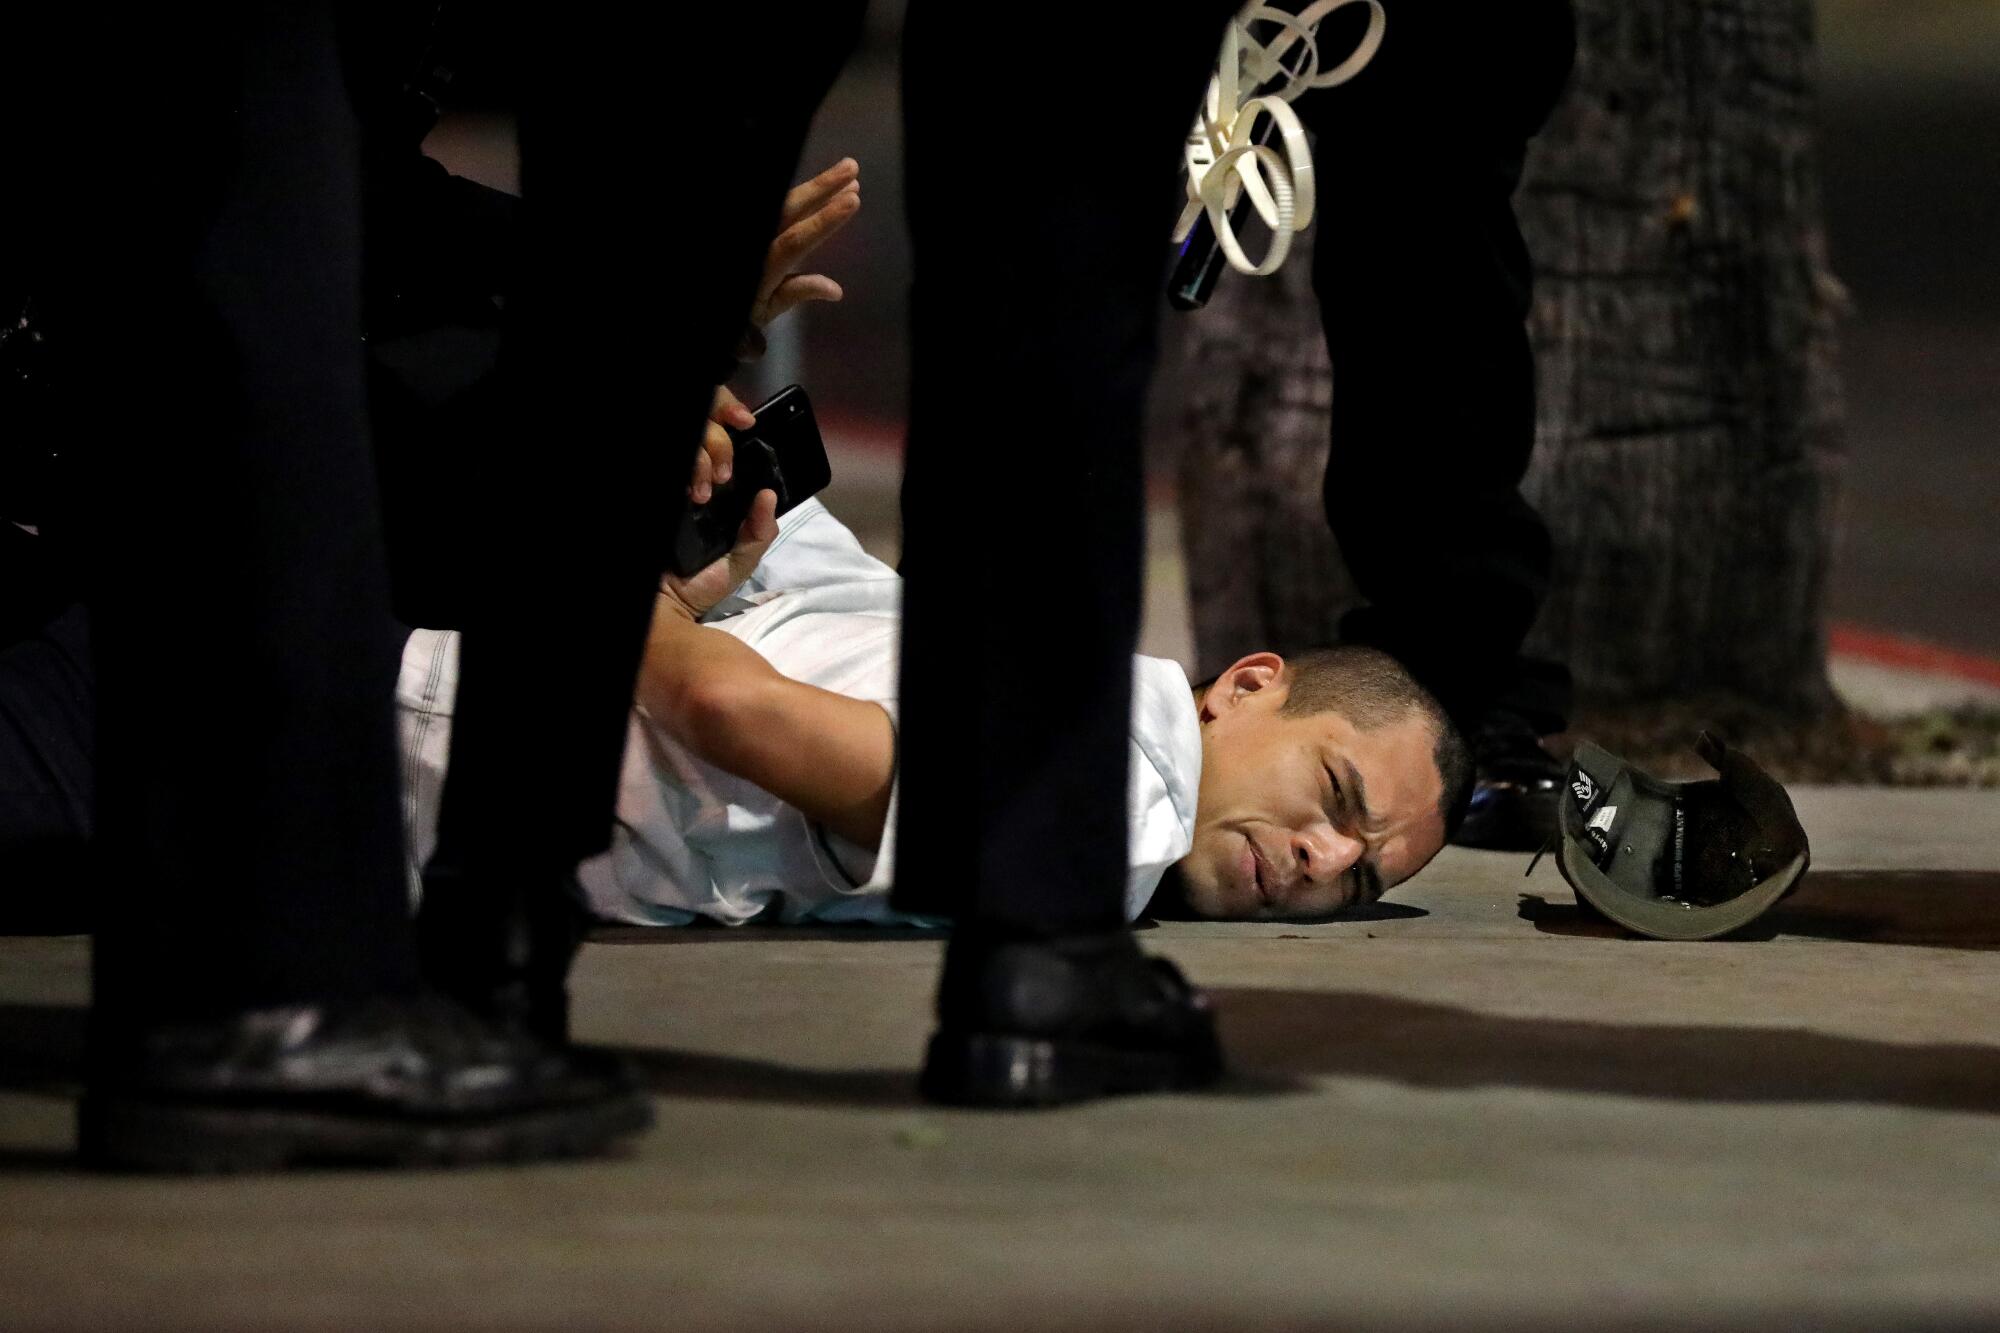 A protester is arrested for violating curfew at Sunset Boulevard in Los Angeles.